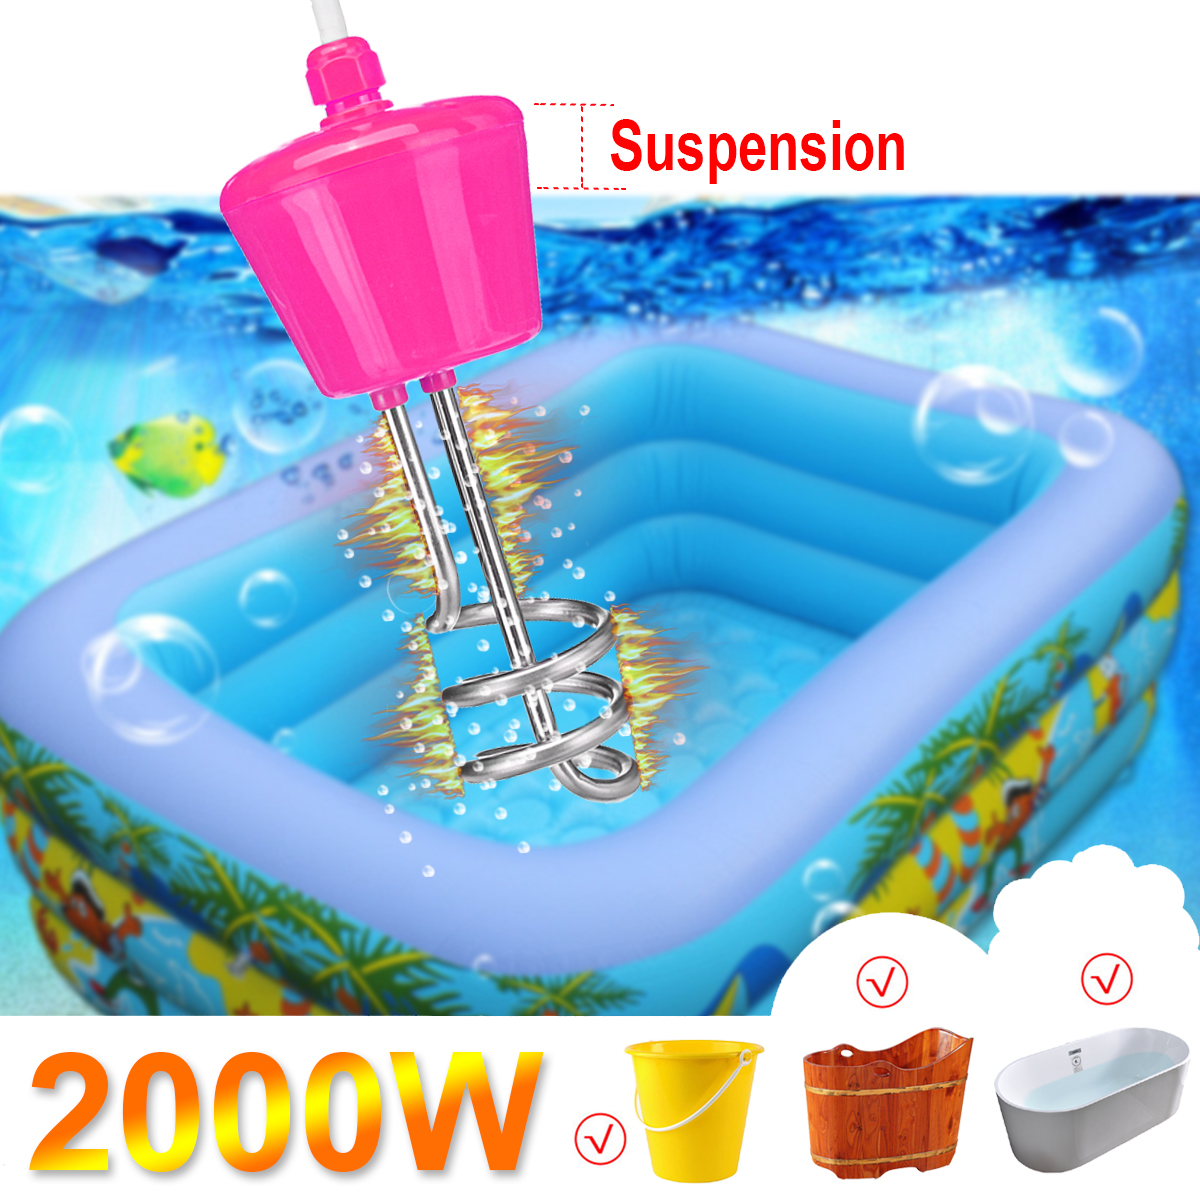 2000W-Suspension-Immersion-Water-Heater-Stainless-Steel-for-Inflatable-Pool-Tub-1339737-1